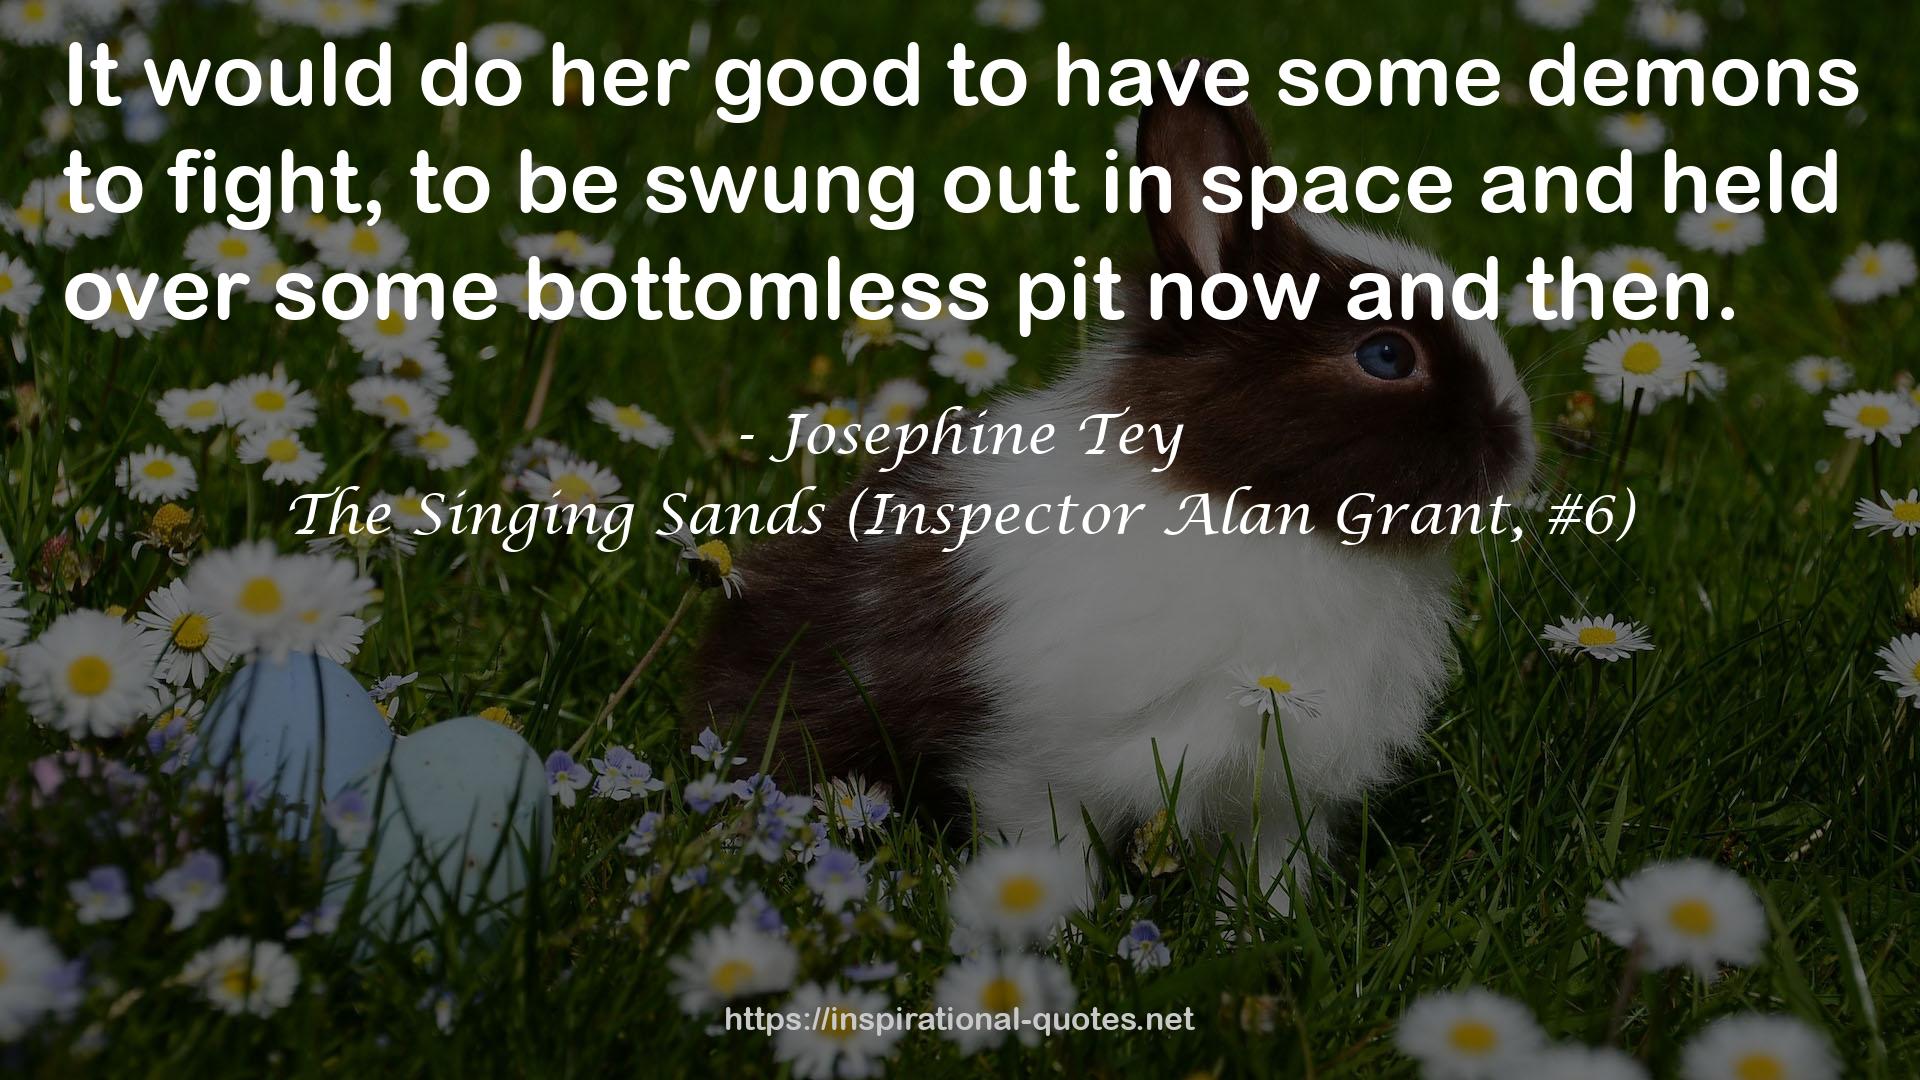 The Singing Sands (Inspector Alan Grant, #6) QUOTES